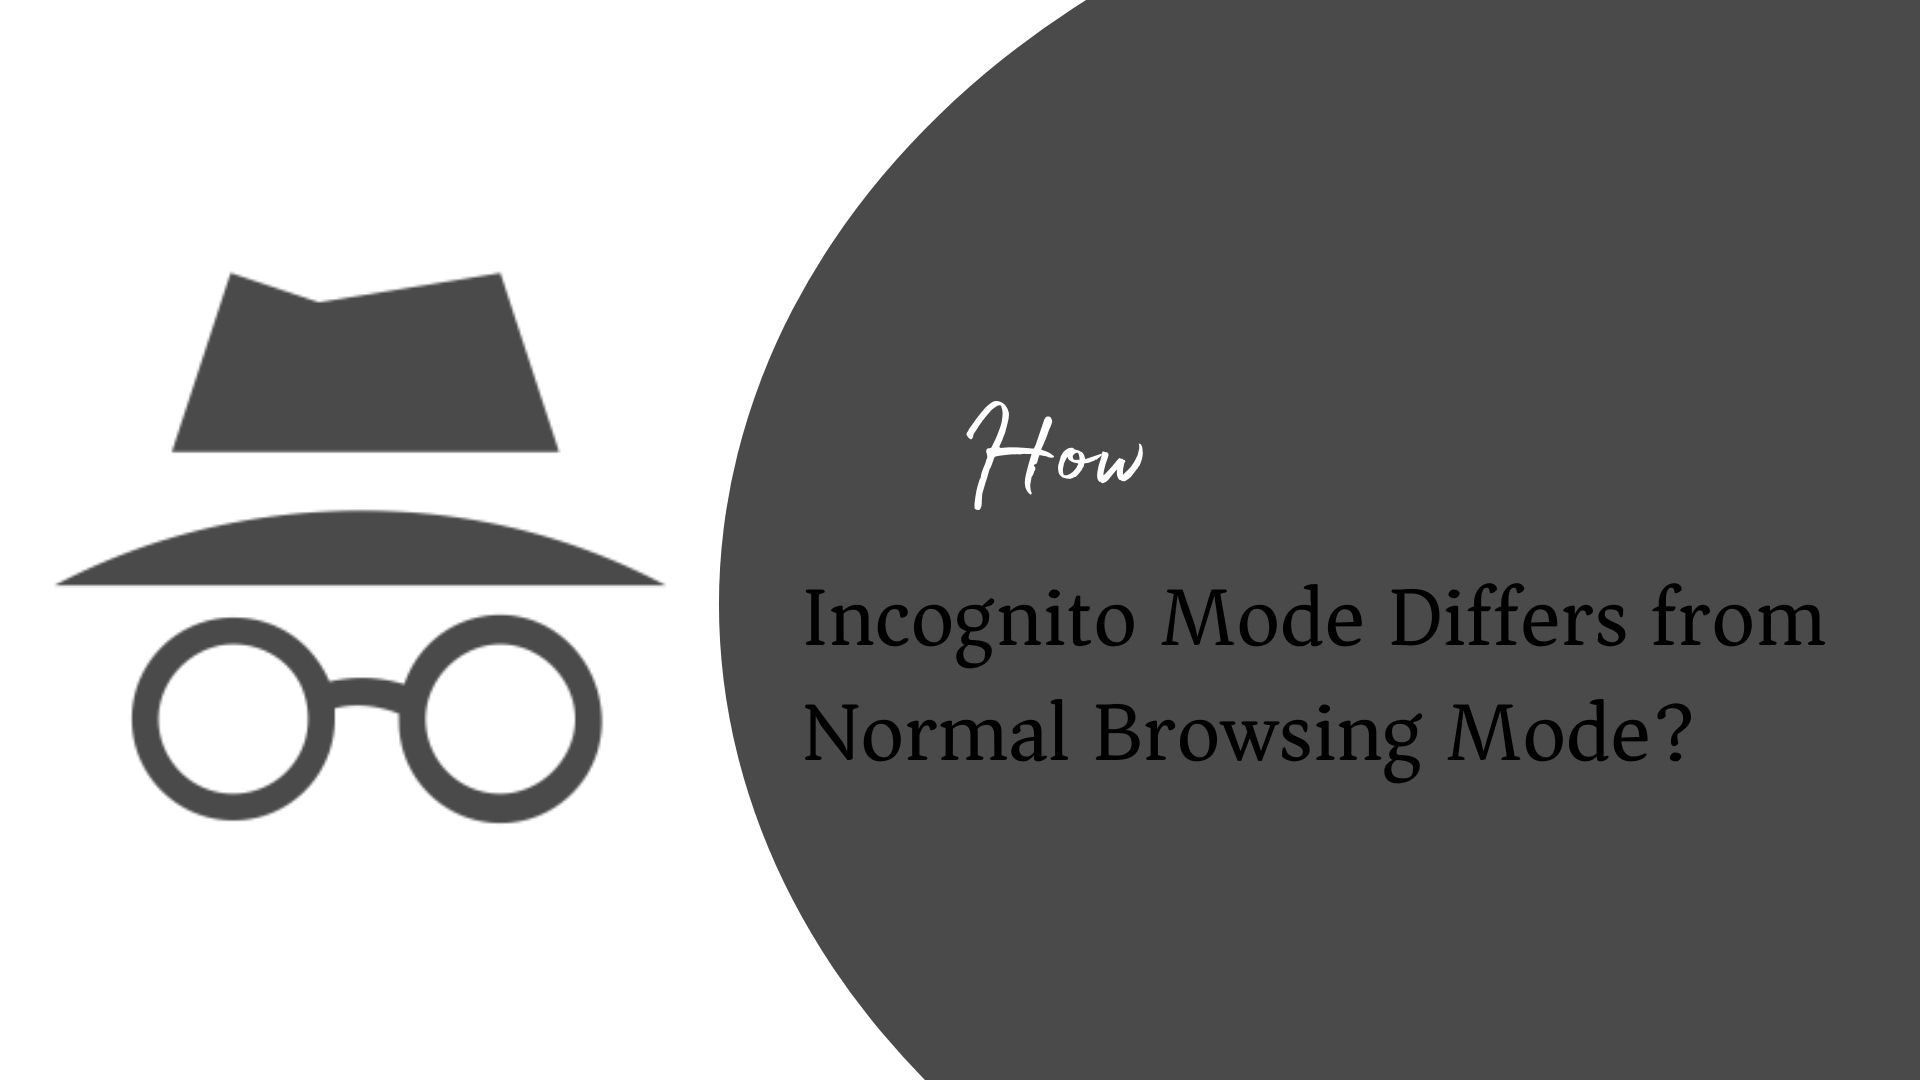 How Incognito Mode Differs from Normal Browsing Mode?